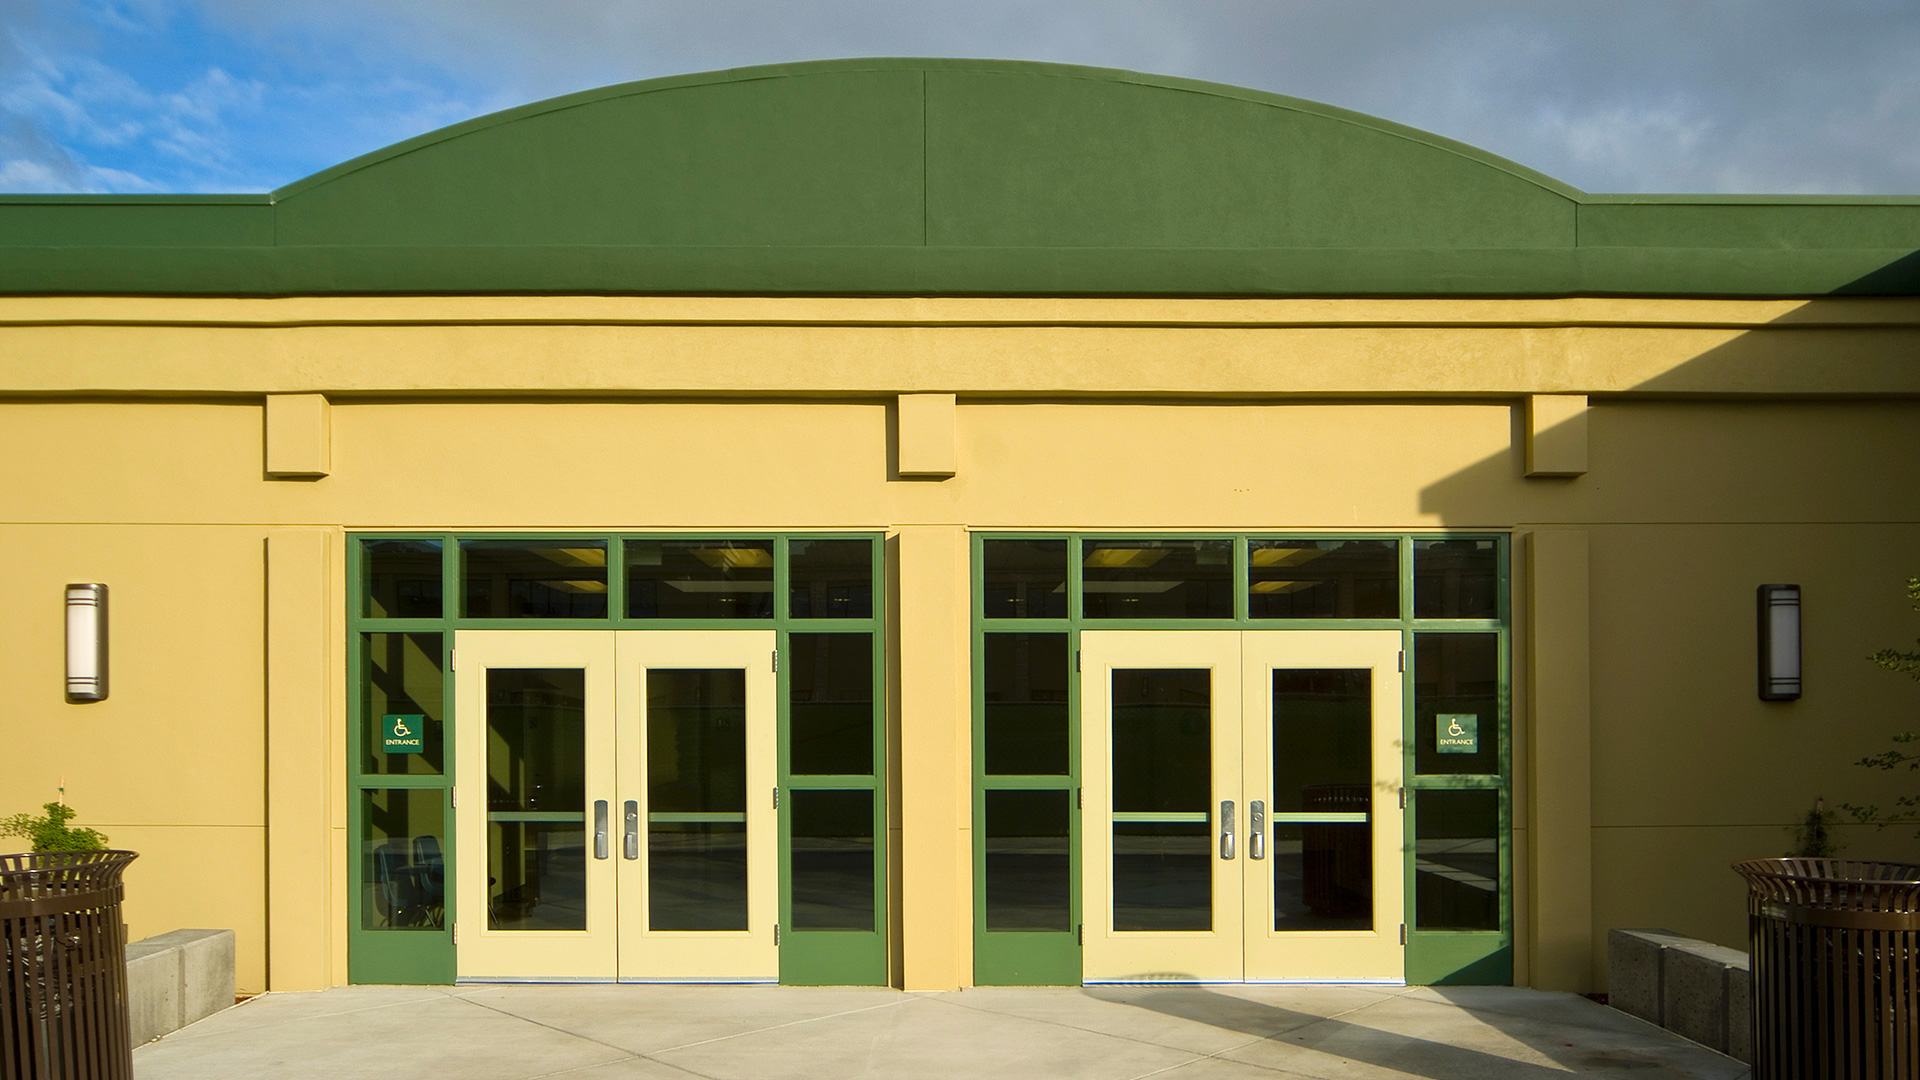 One story modular classroom wing with beige walls and green details, and two large double door entrance.